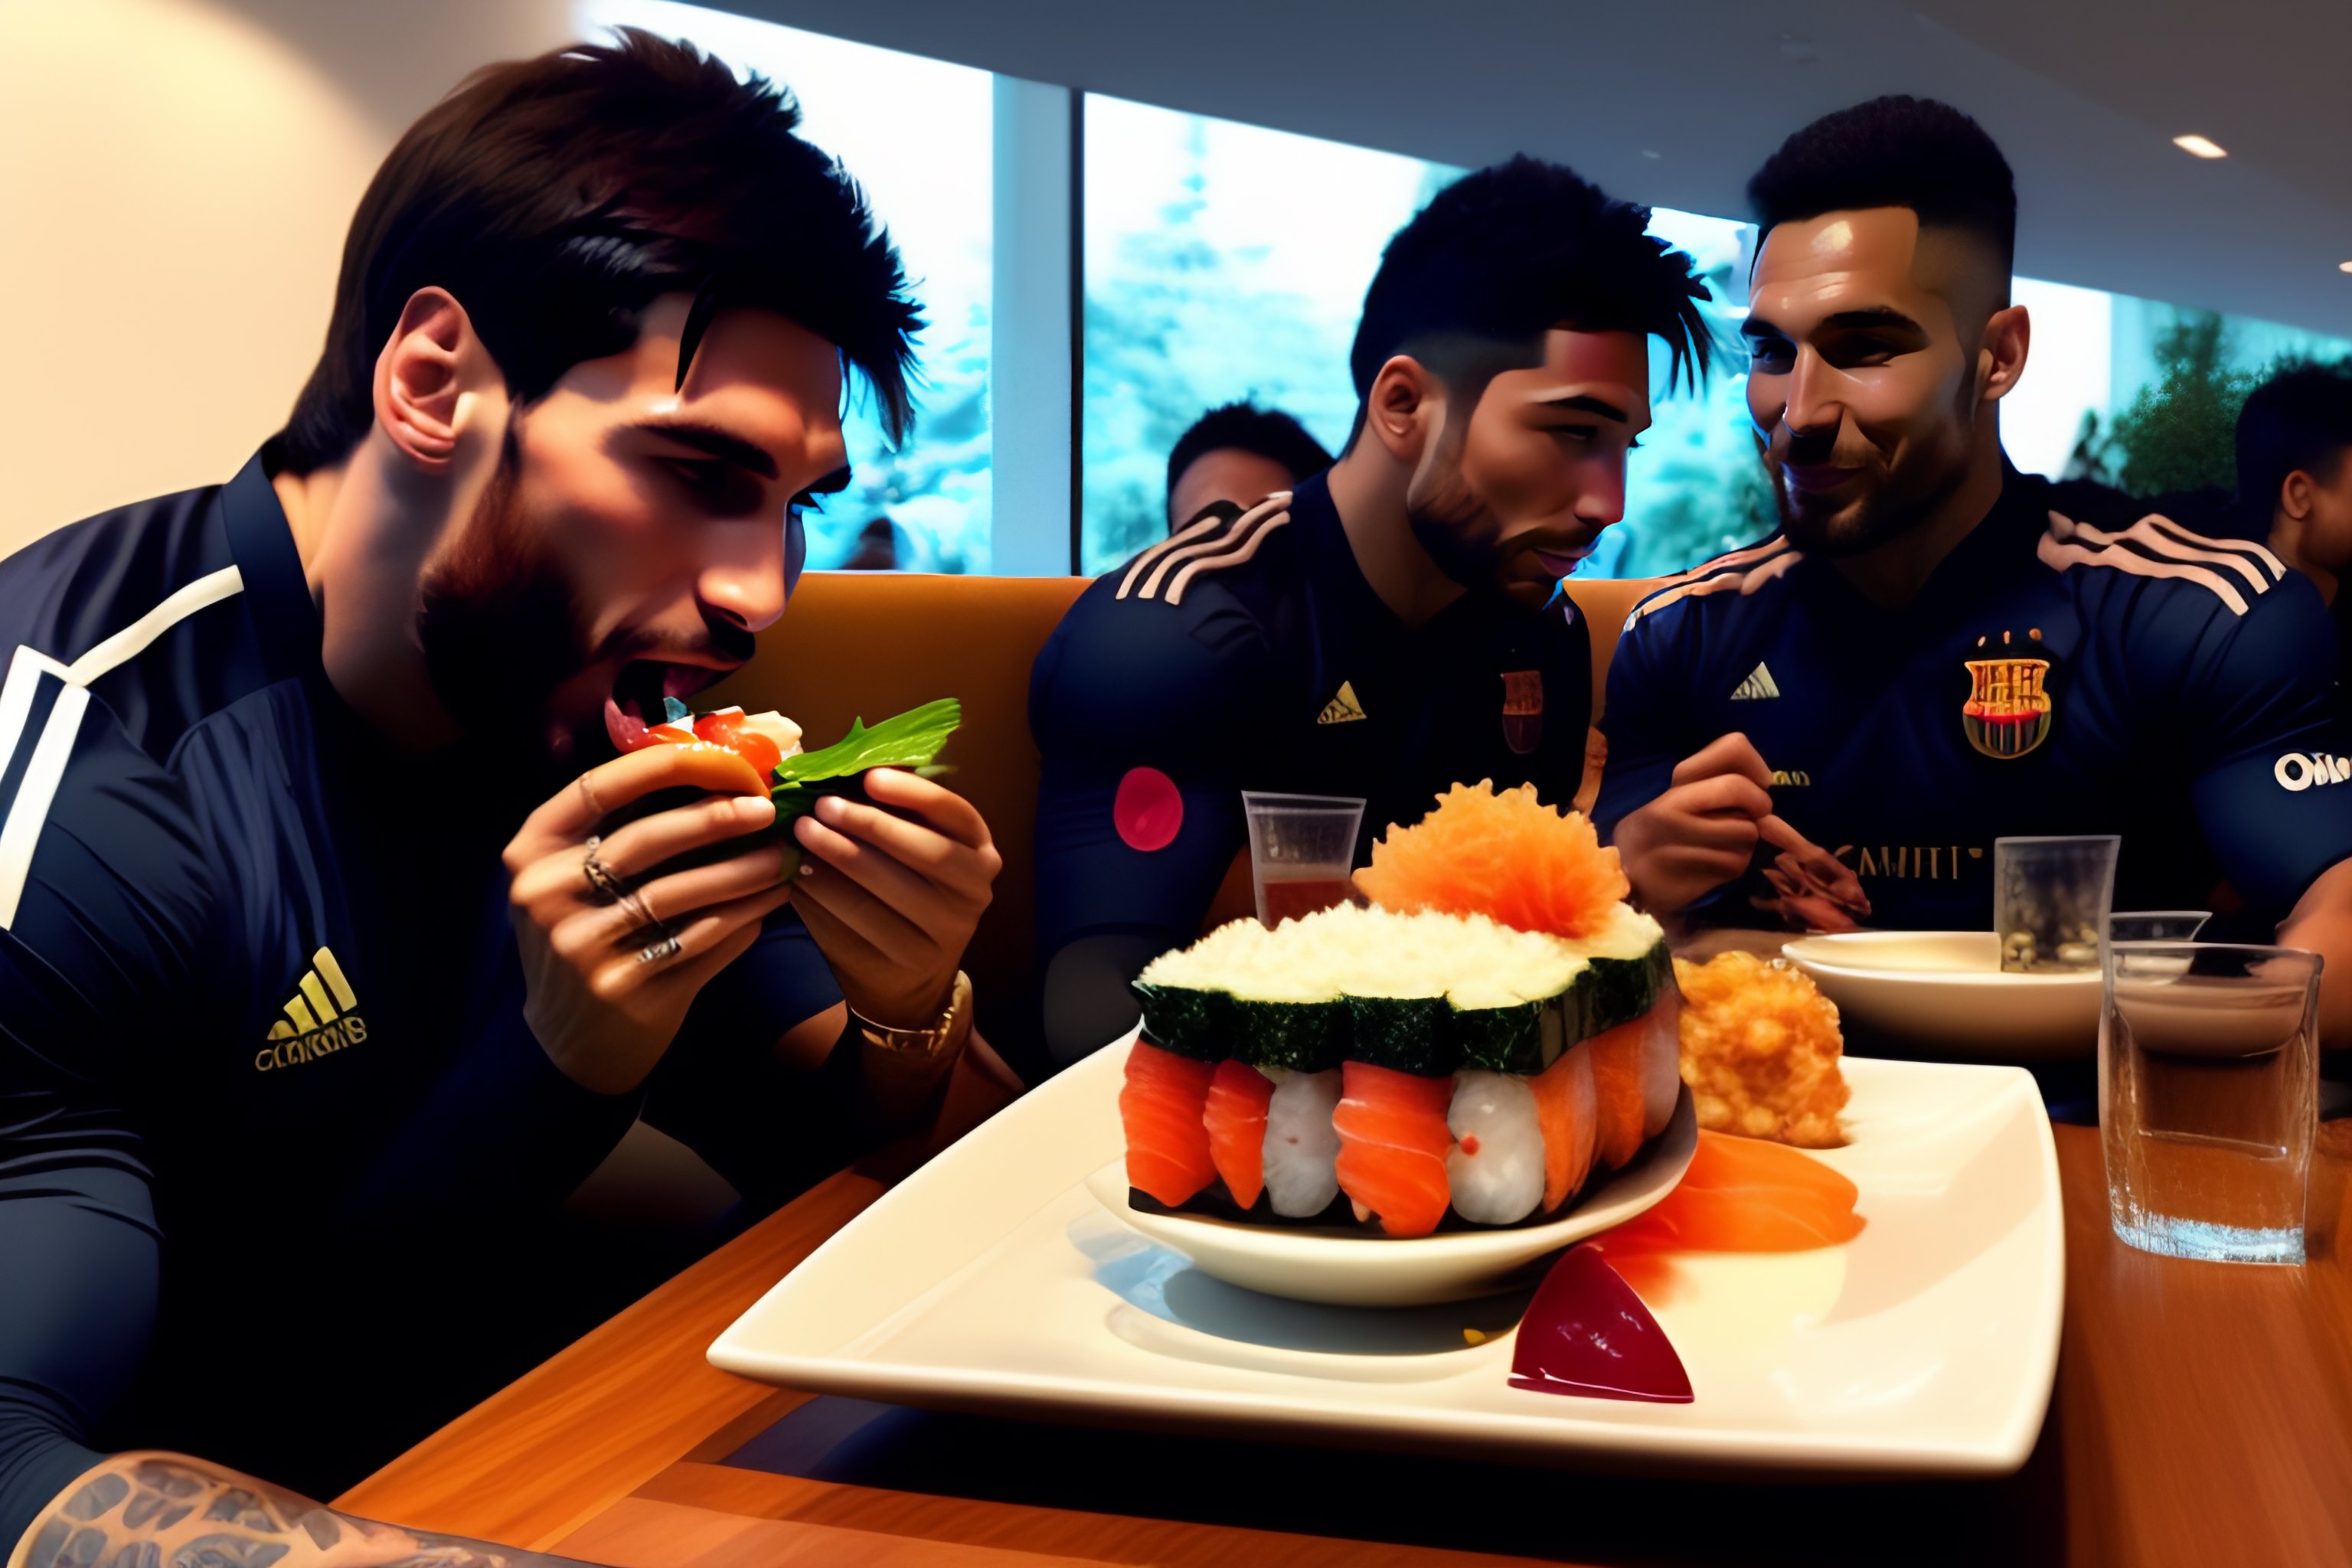 Lexica - Leonel Messi eating sushi